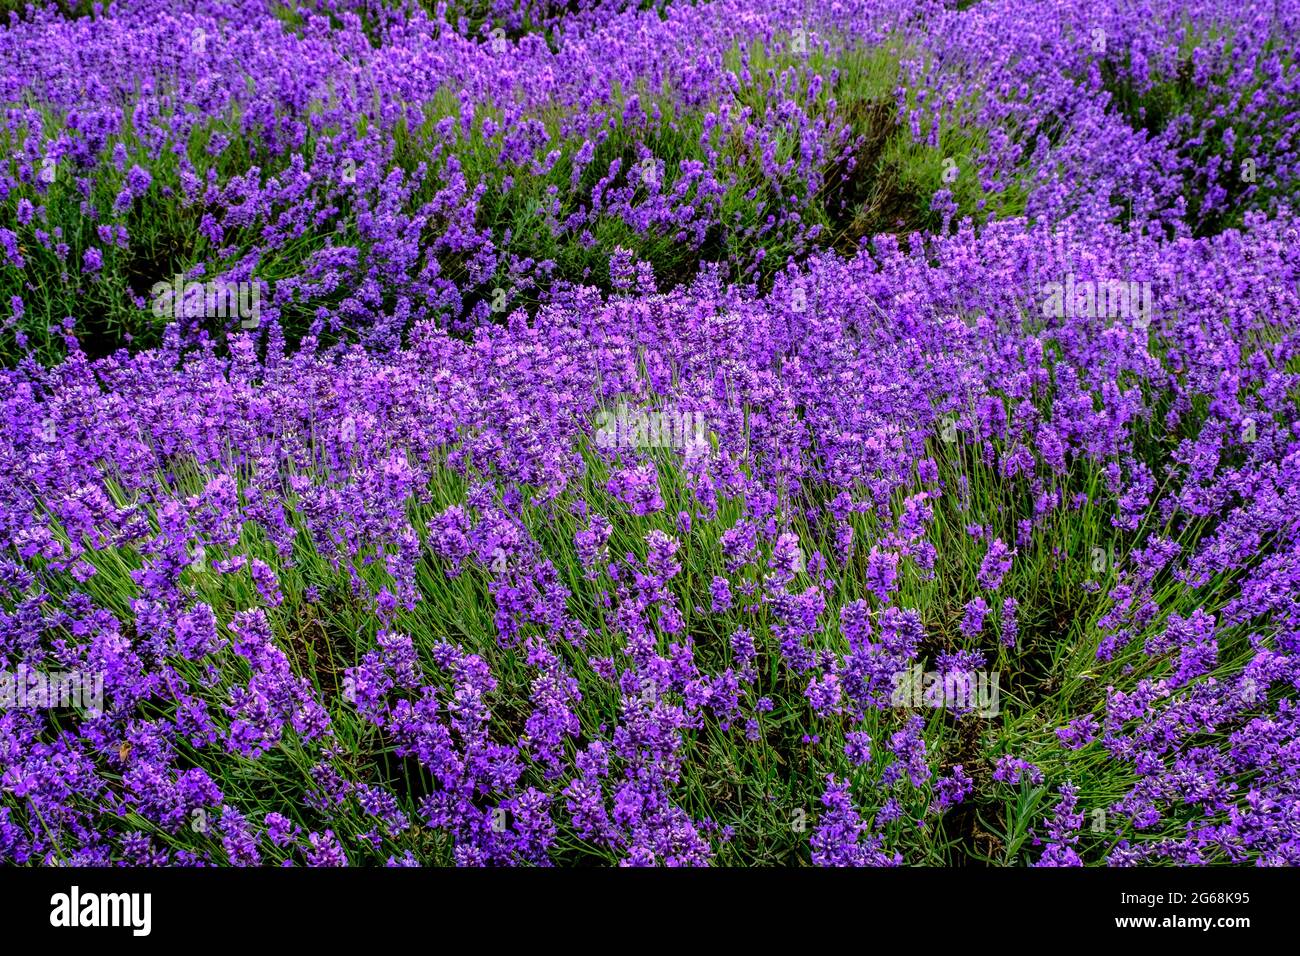 Lavender in full bloom, growing in a field. Stock Photo